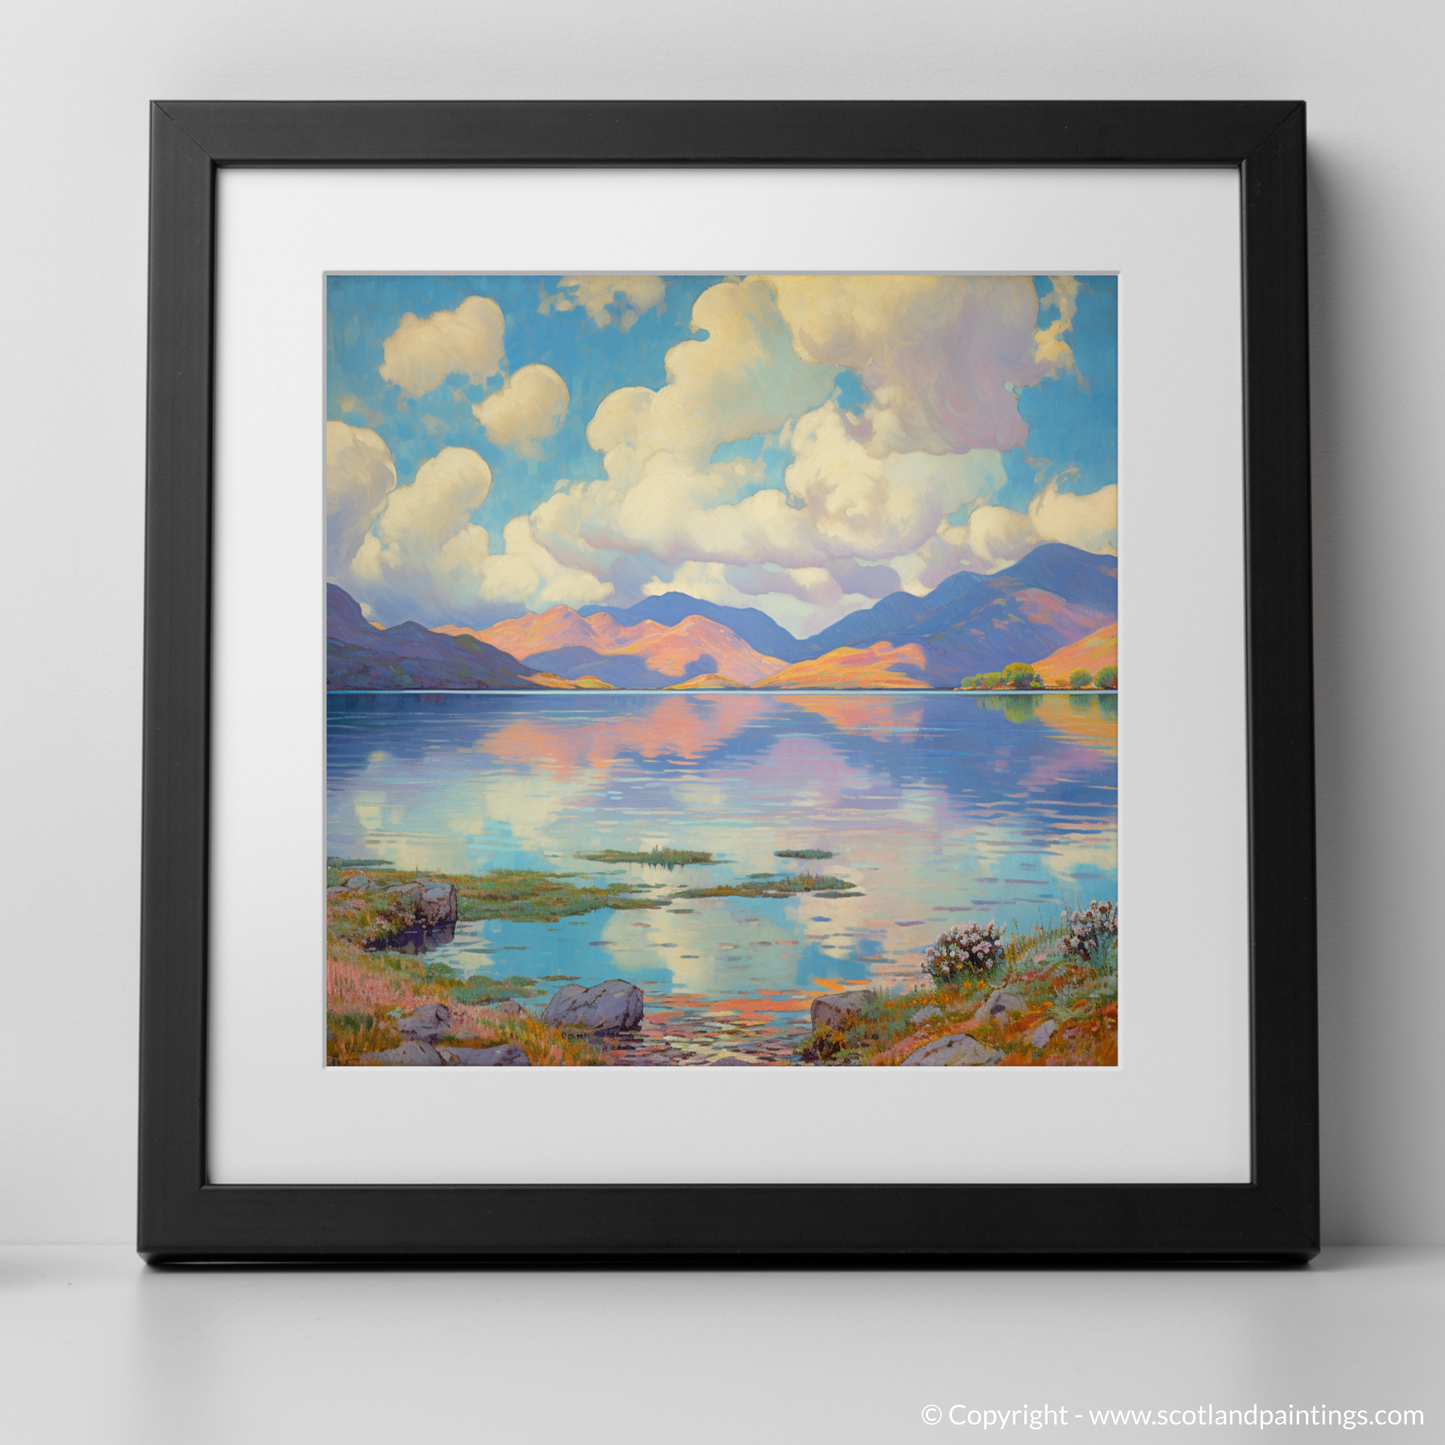 Art Print of Loch Linnhe, Highlands in summer with a black frame